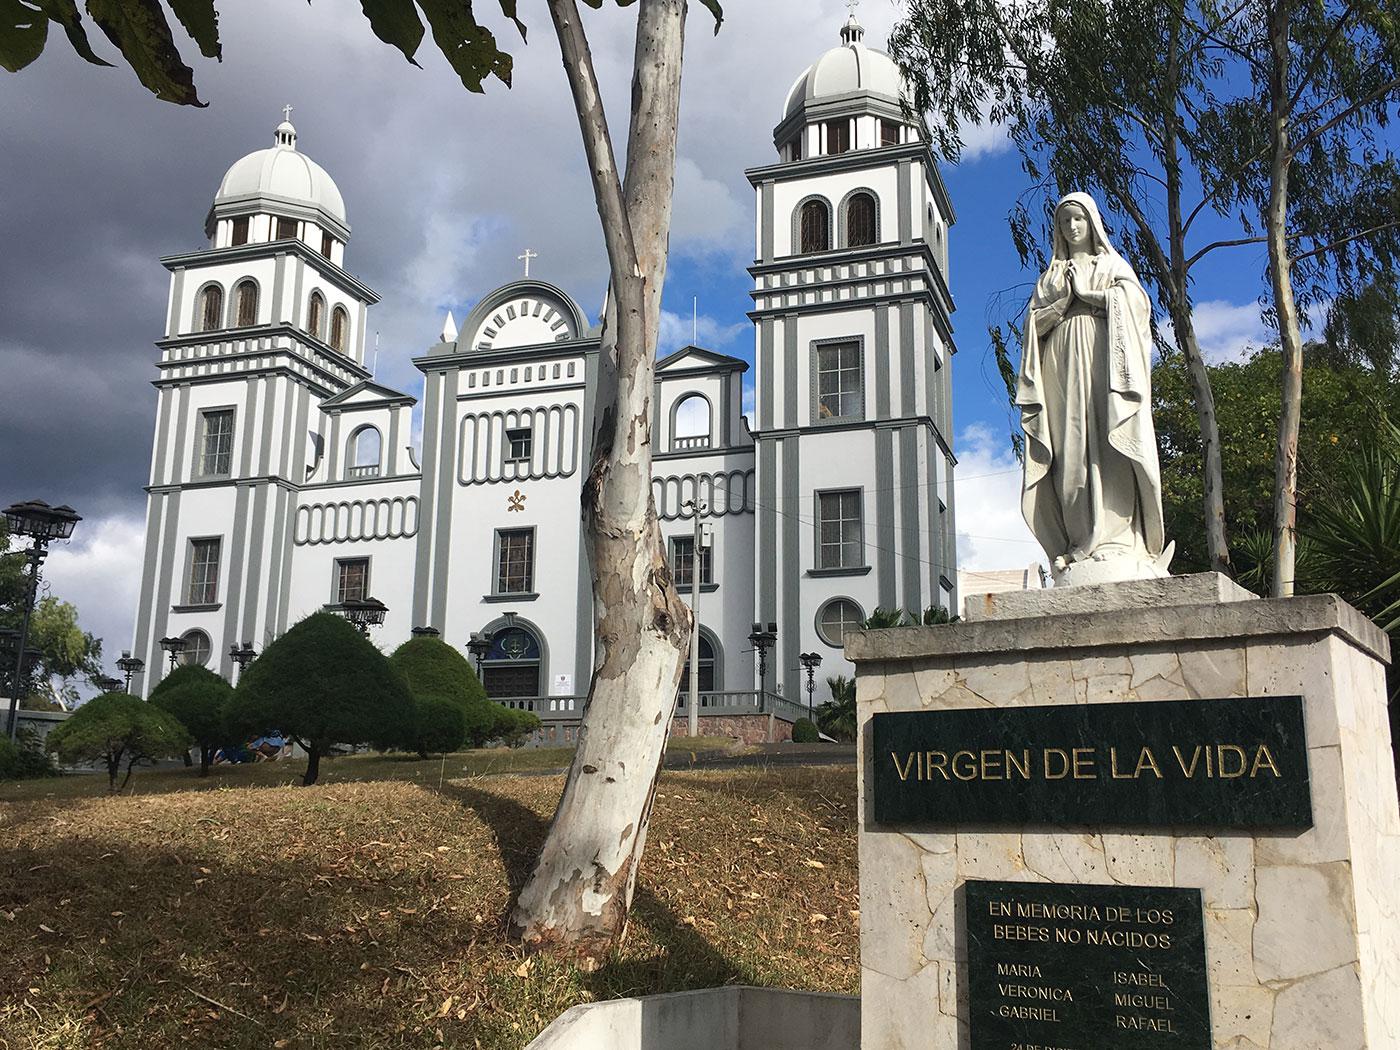 A statue of the Virgin Mary on the grounds of the Catholic Basilica of Our Lady of Suyapa in Tegucigalpa, Honduras. The statue is labeled “Virgin of Life” with a plaque by an anti-abortion group called Comite Provida (Pro Life Committee) commemorating “th